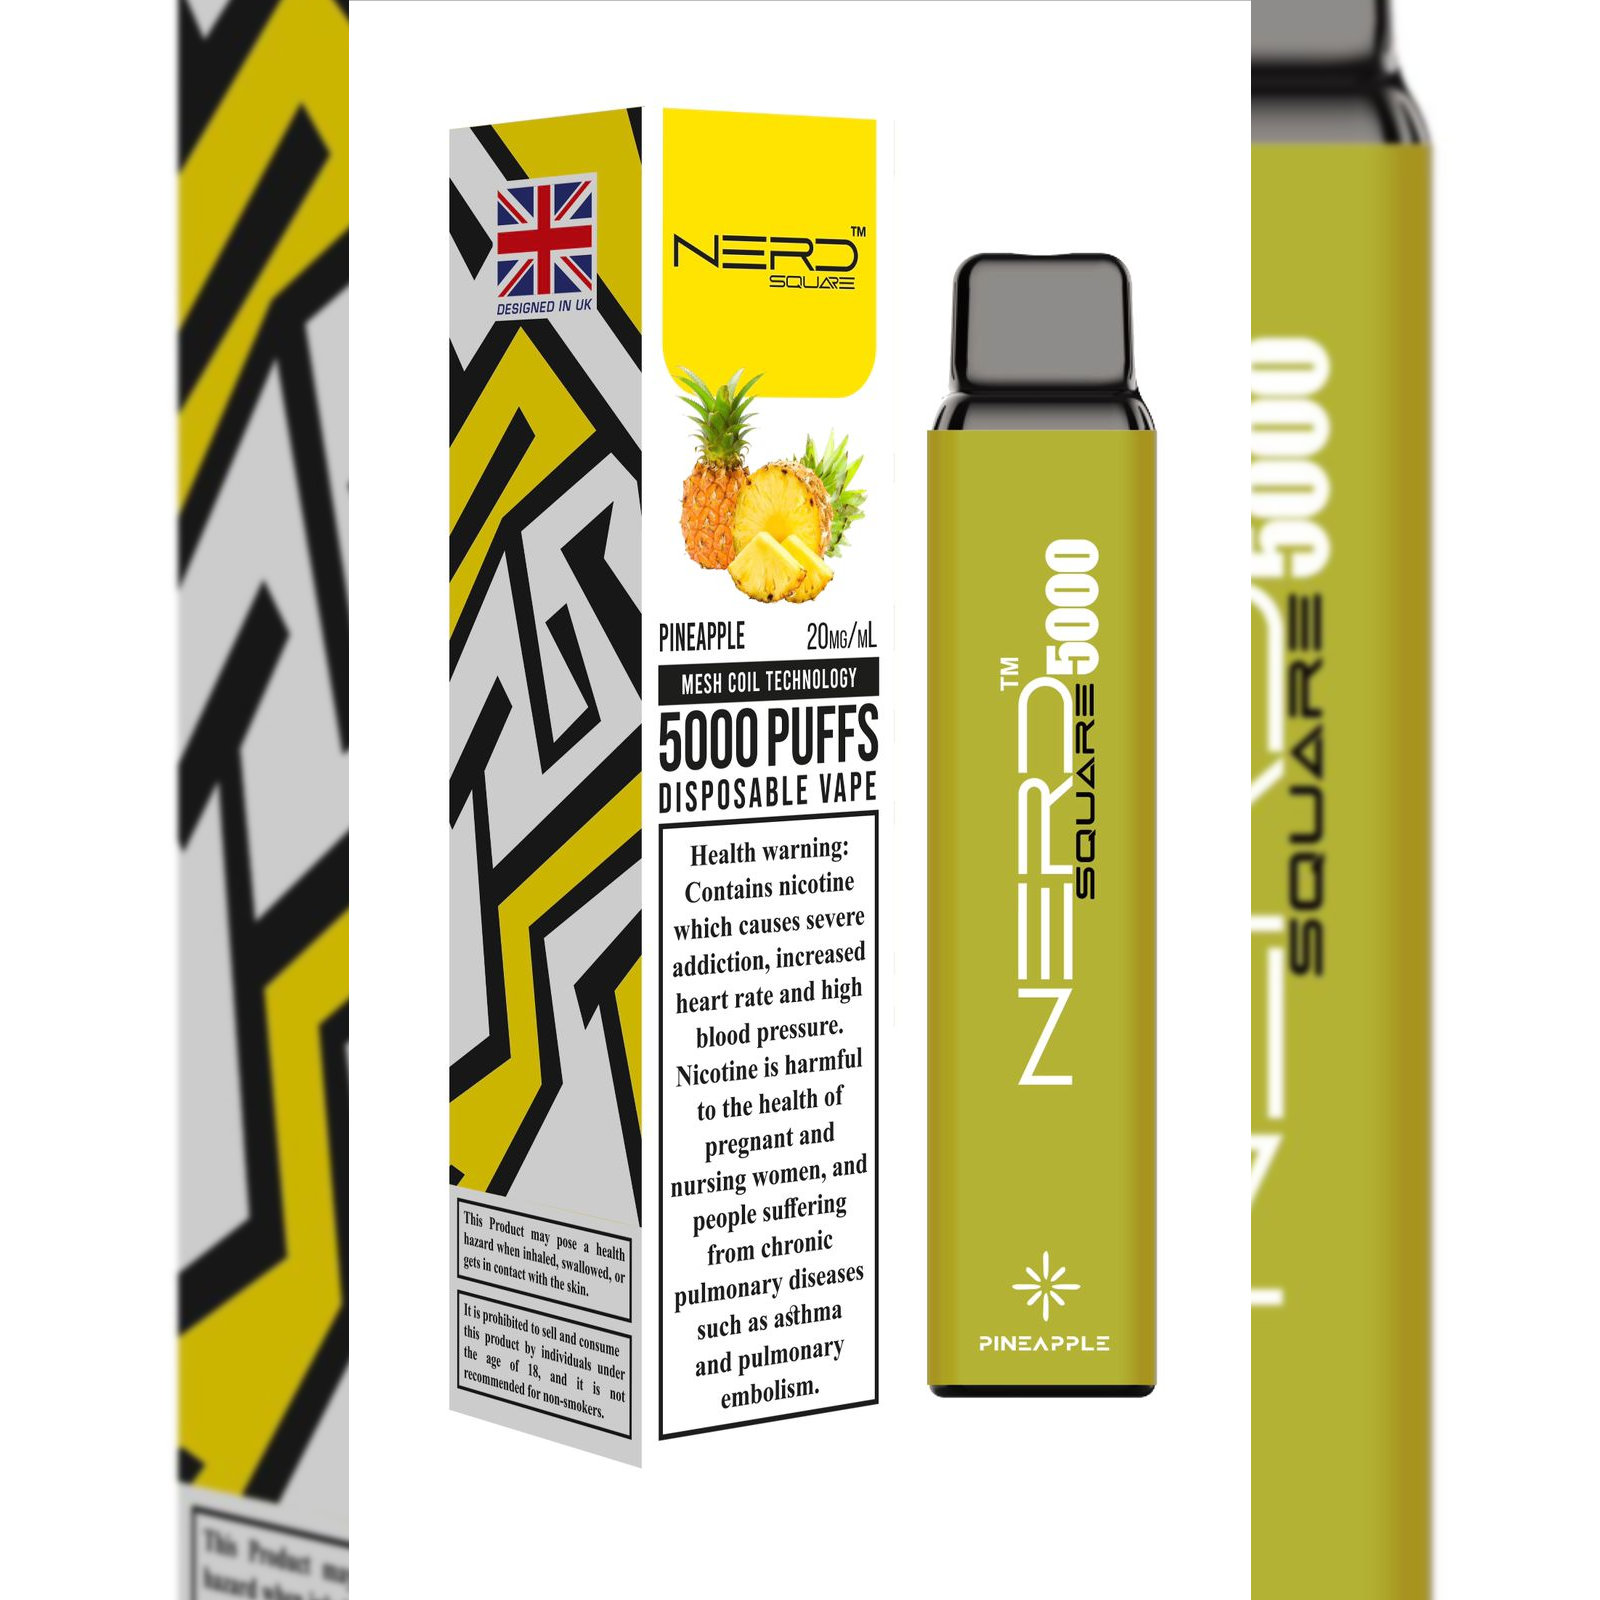 Nerd Square 5000 Puffs PINEAPPLE- Disposable 